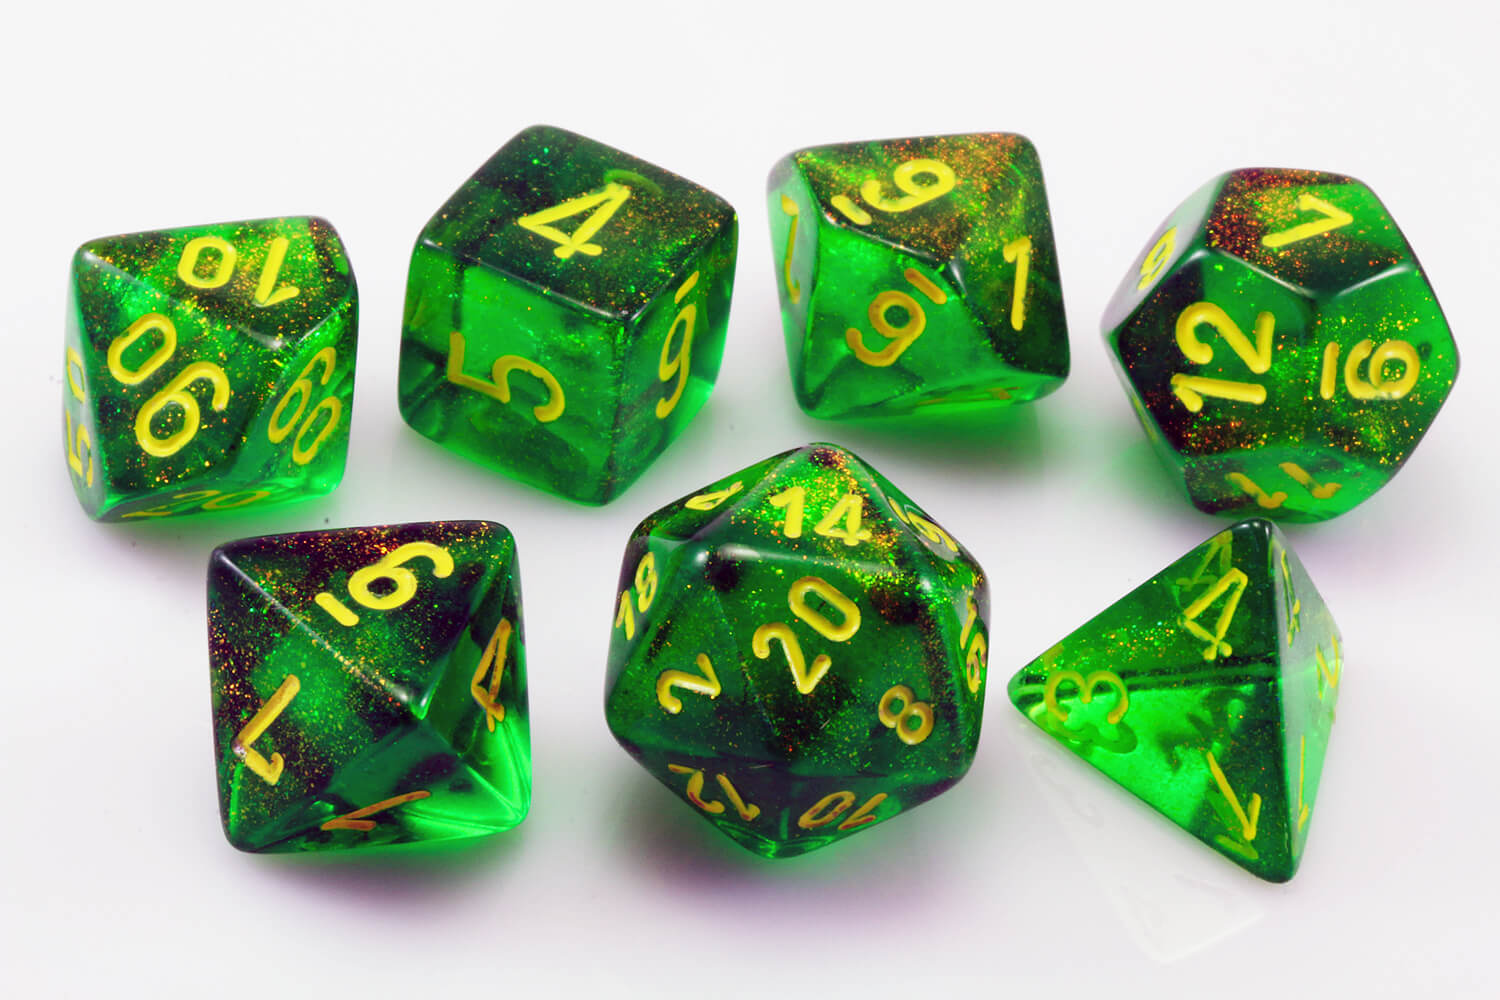 Borealis Dice (Maple Green) RPG Role Playing Game Dice Set